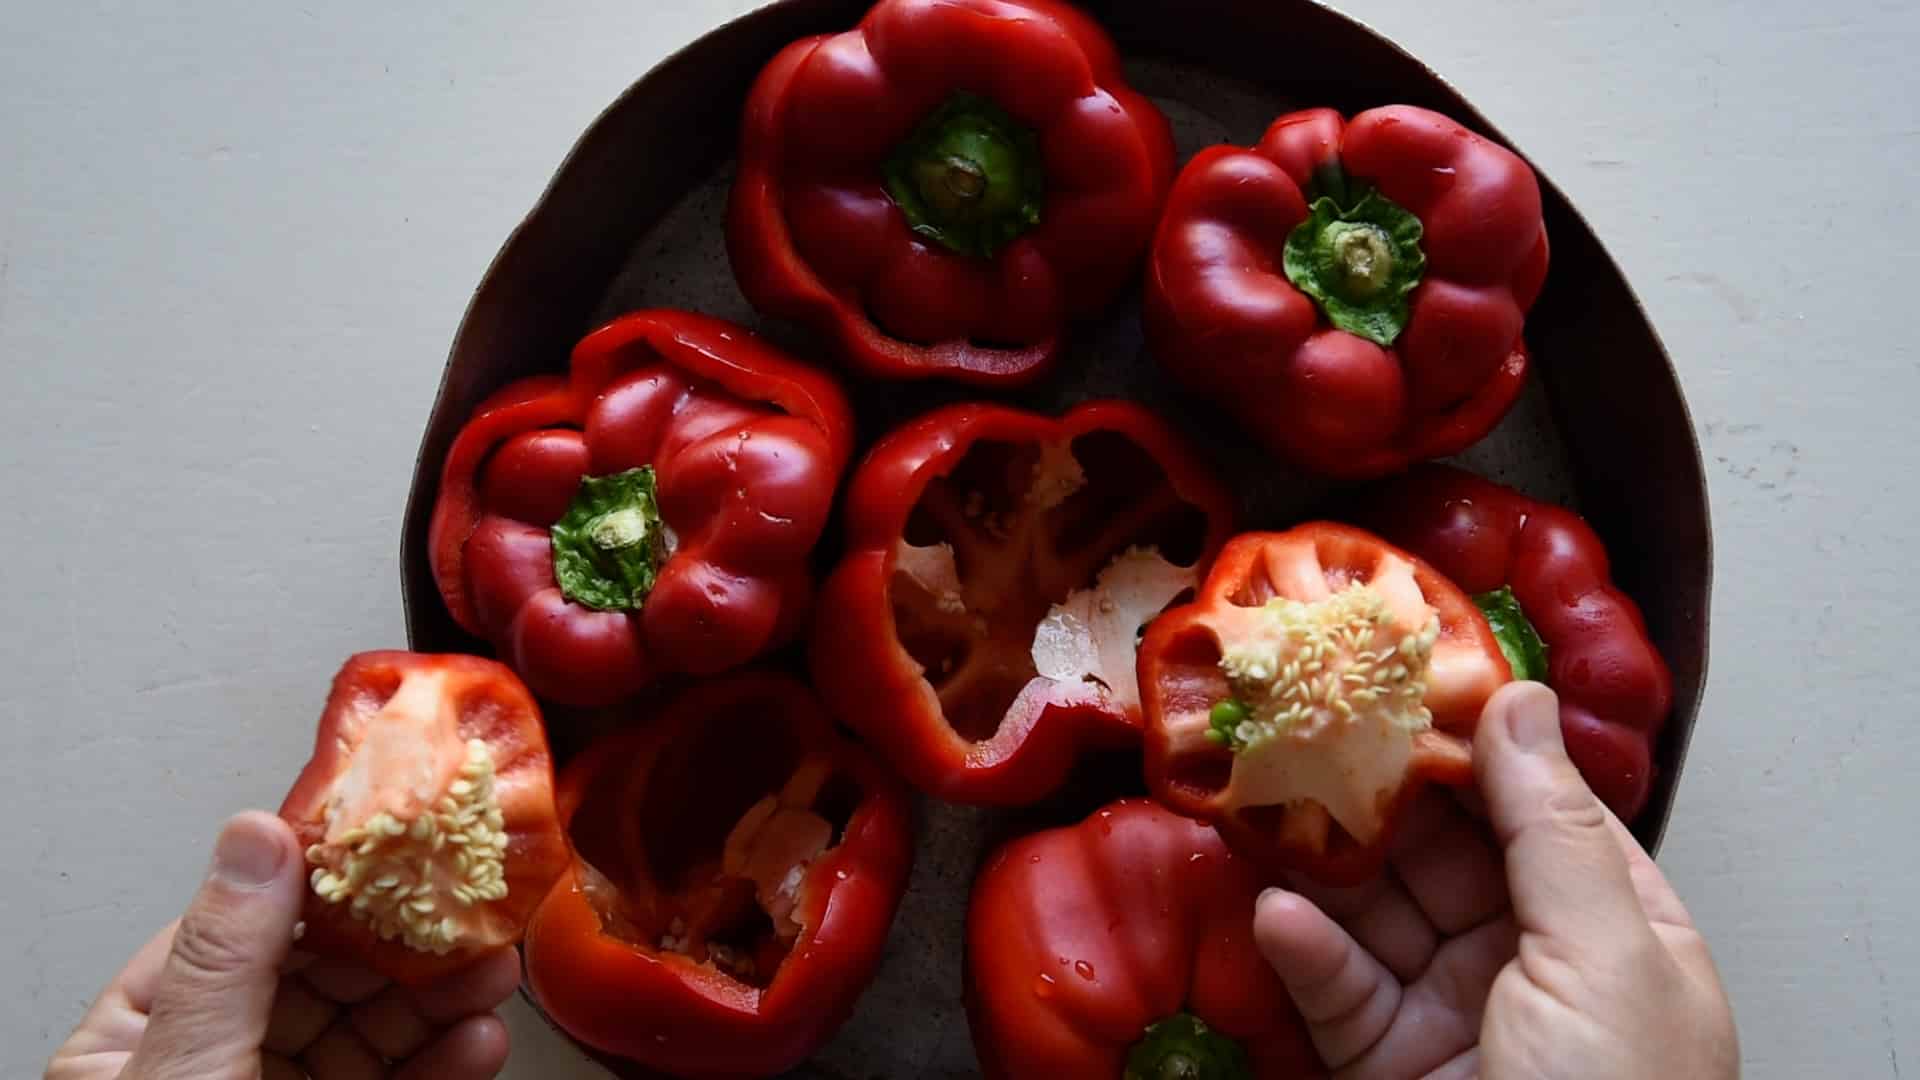 cut the top of the peppers